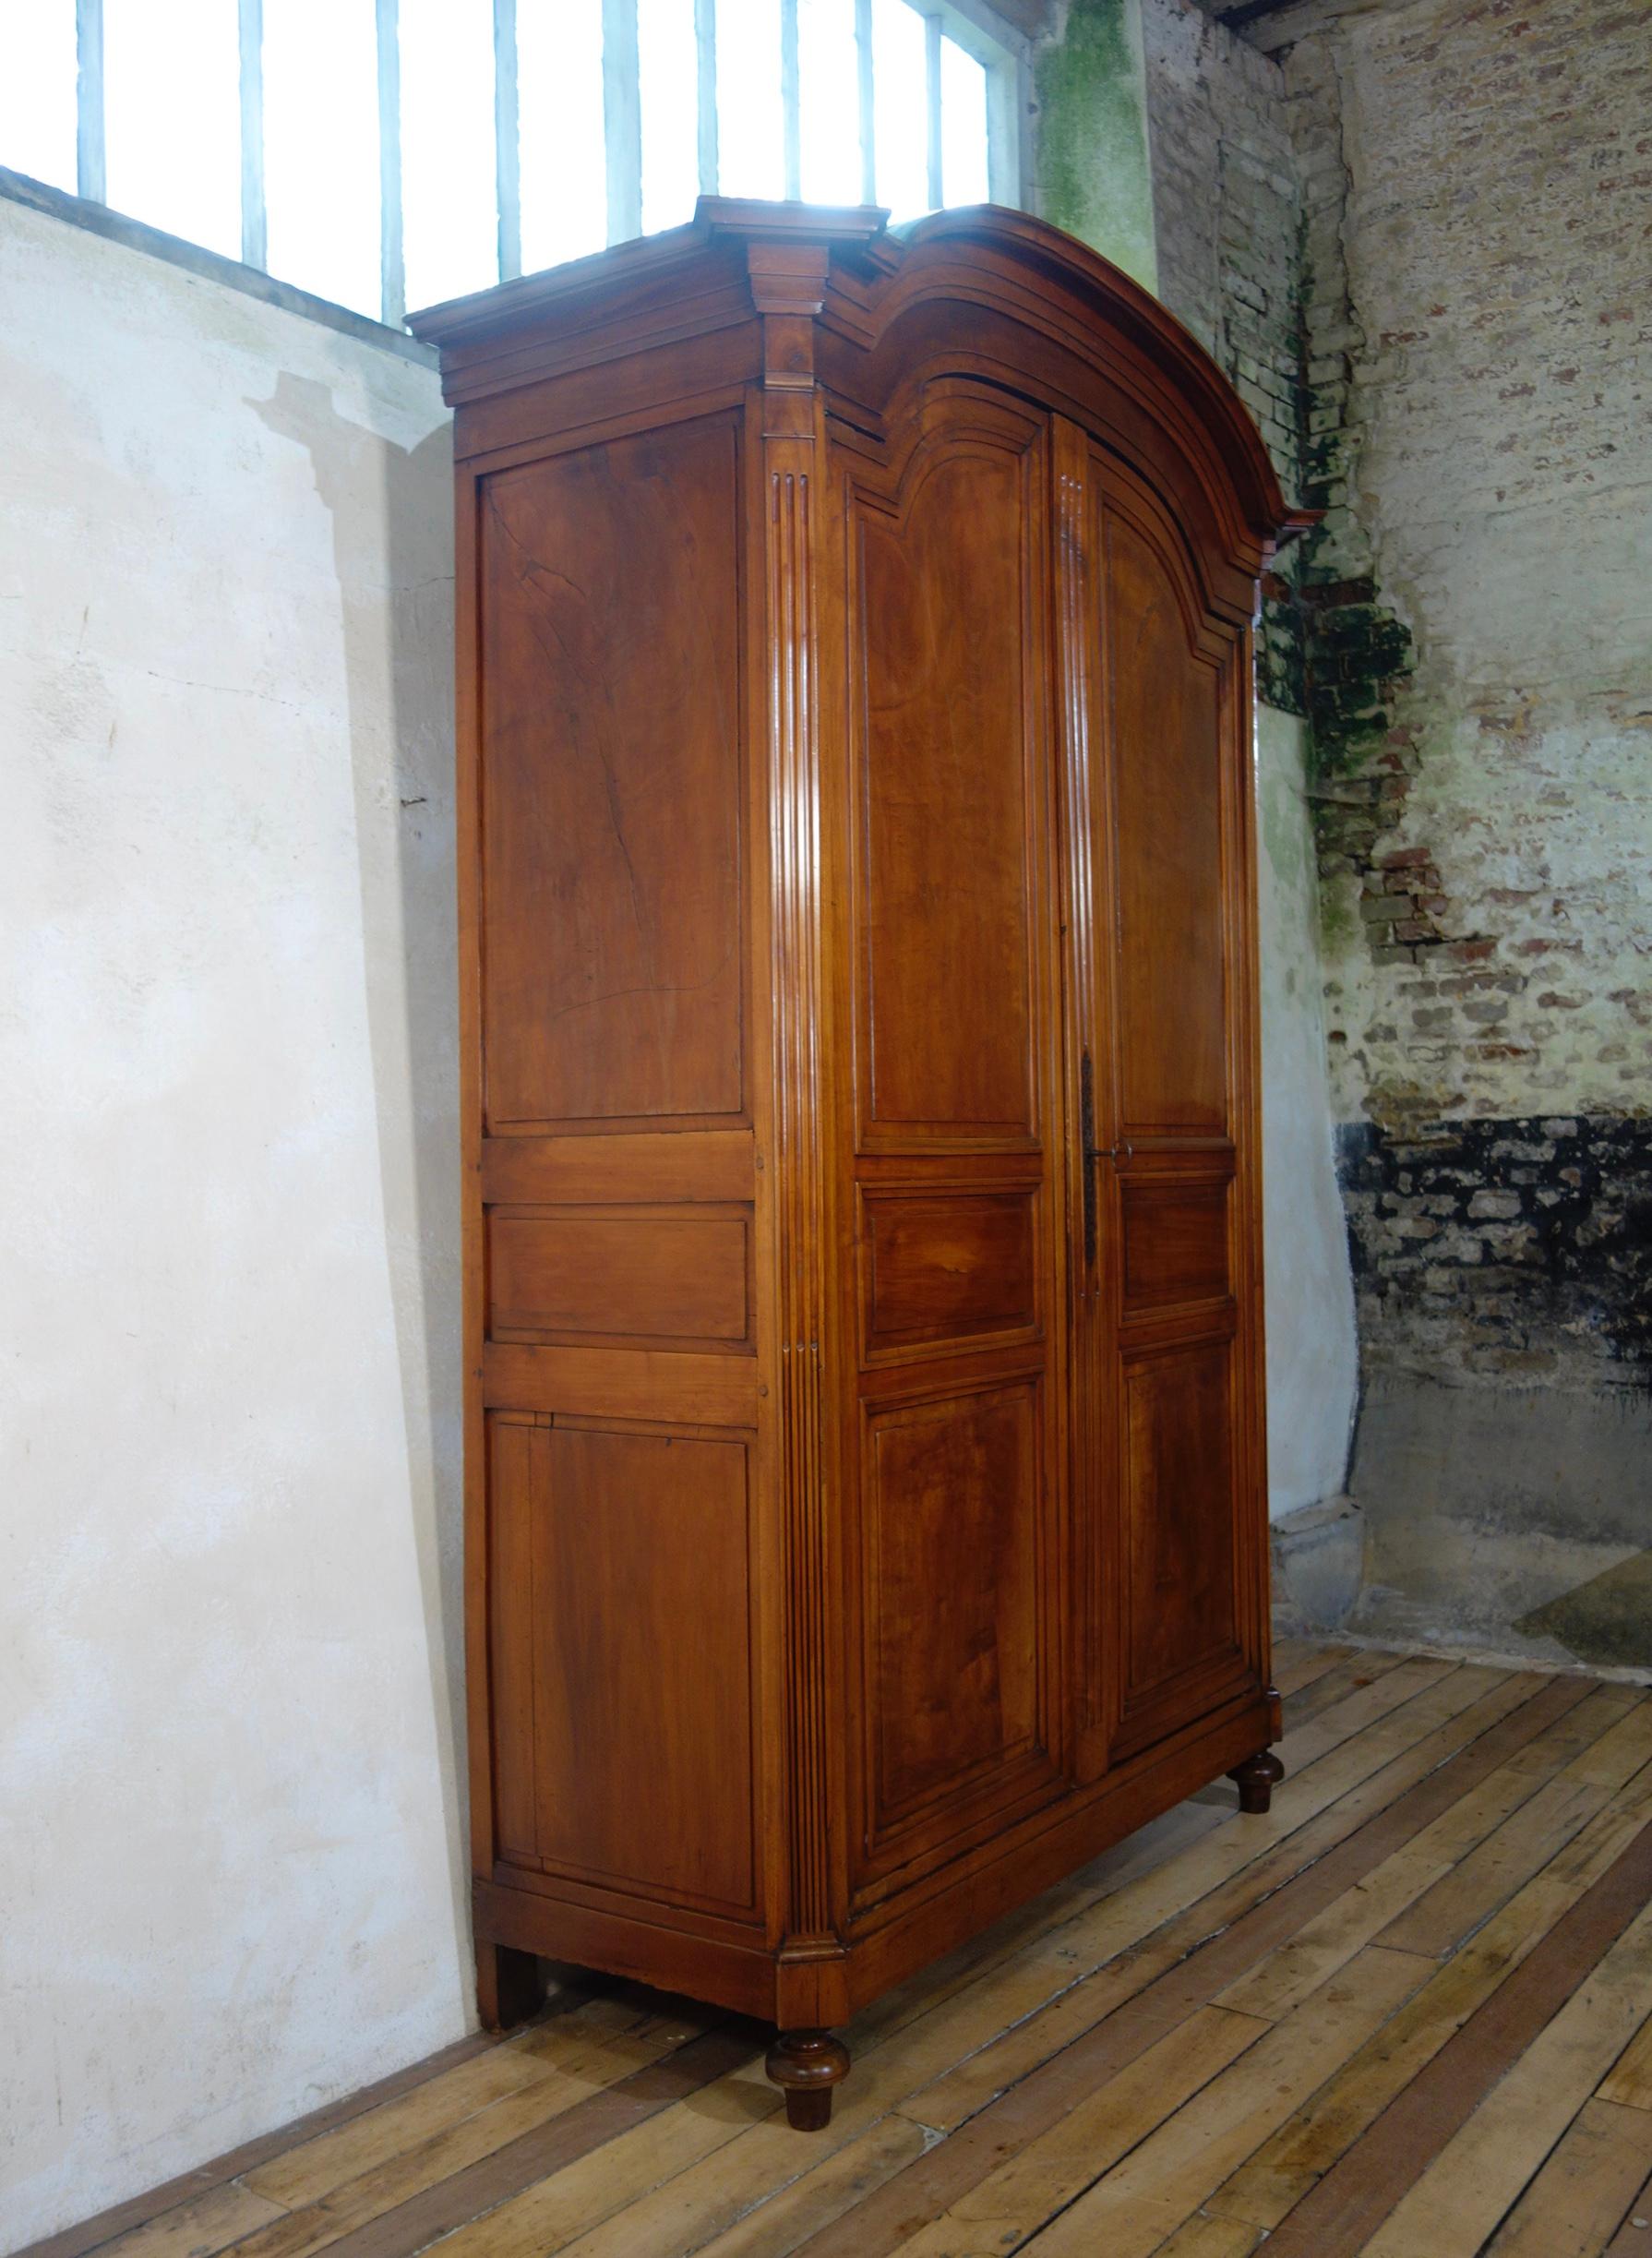 An extremely large Louis XVI walnut armoire, displaying a domed and molded cornice with projecting canted corners. This armoire demonstrates simple inset triple paneled doors, separated by a relief reeded pilaster. Each of the doors features